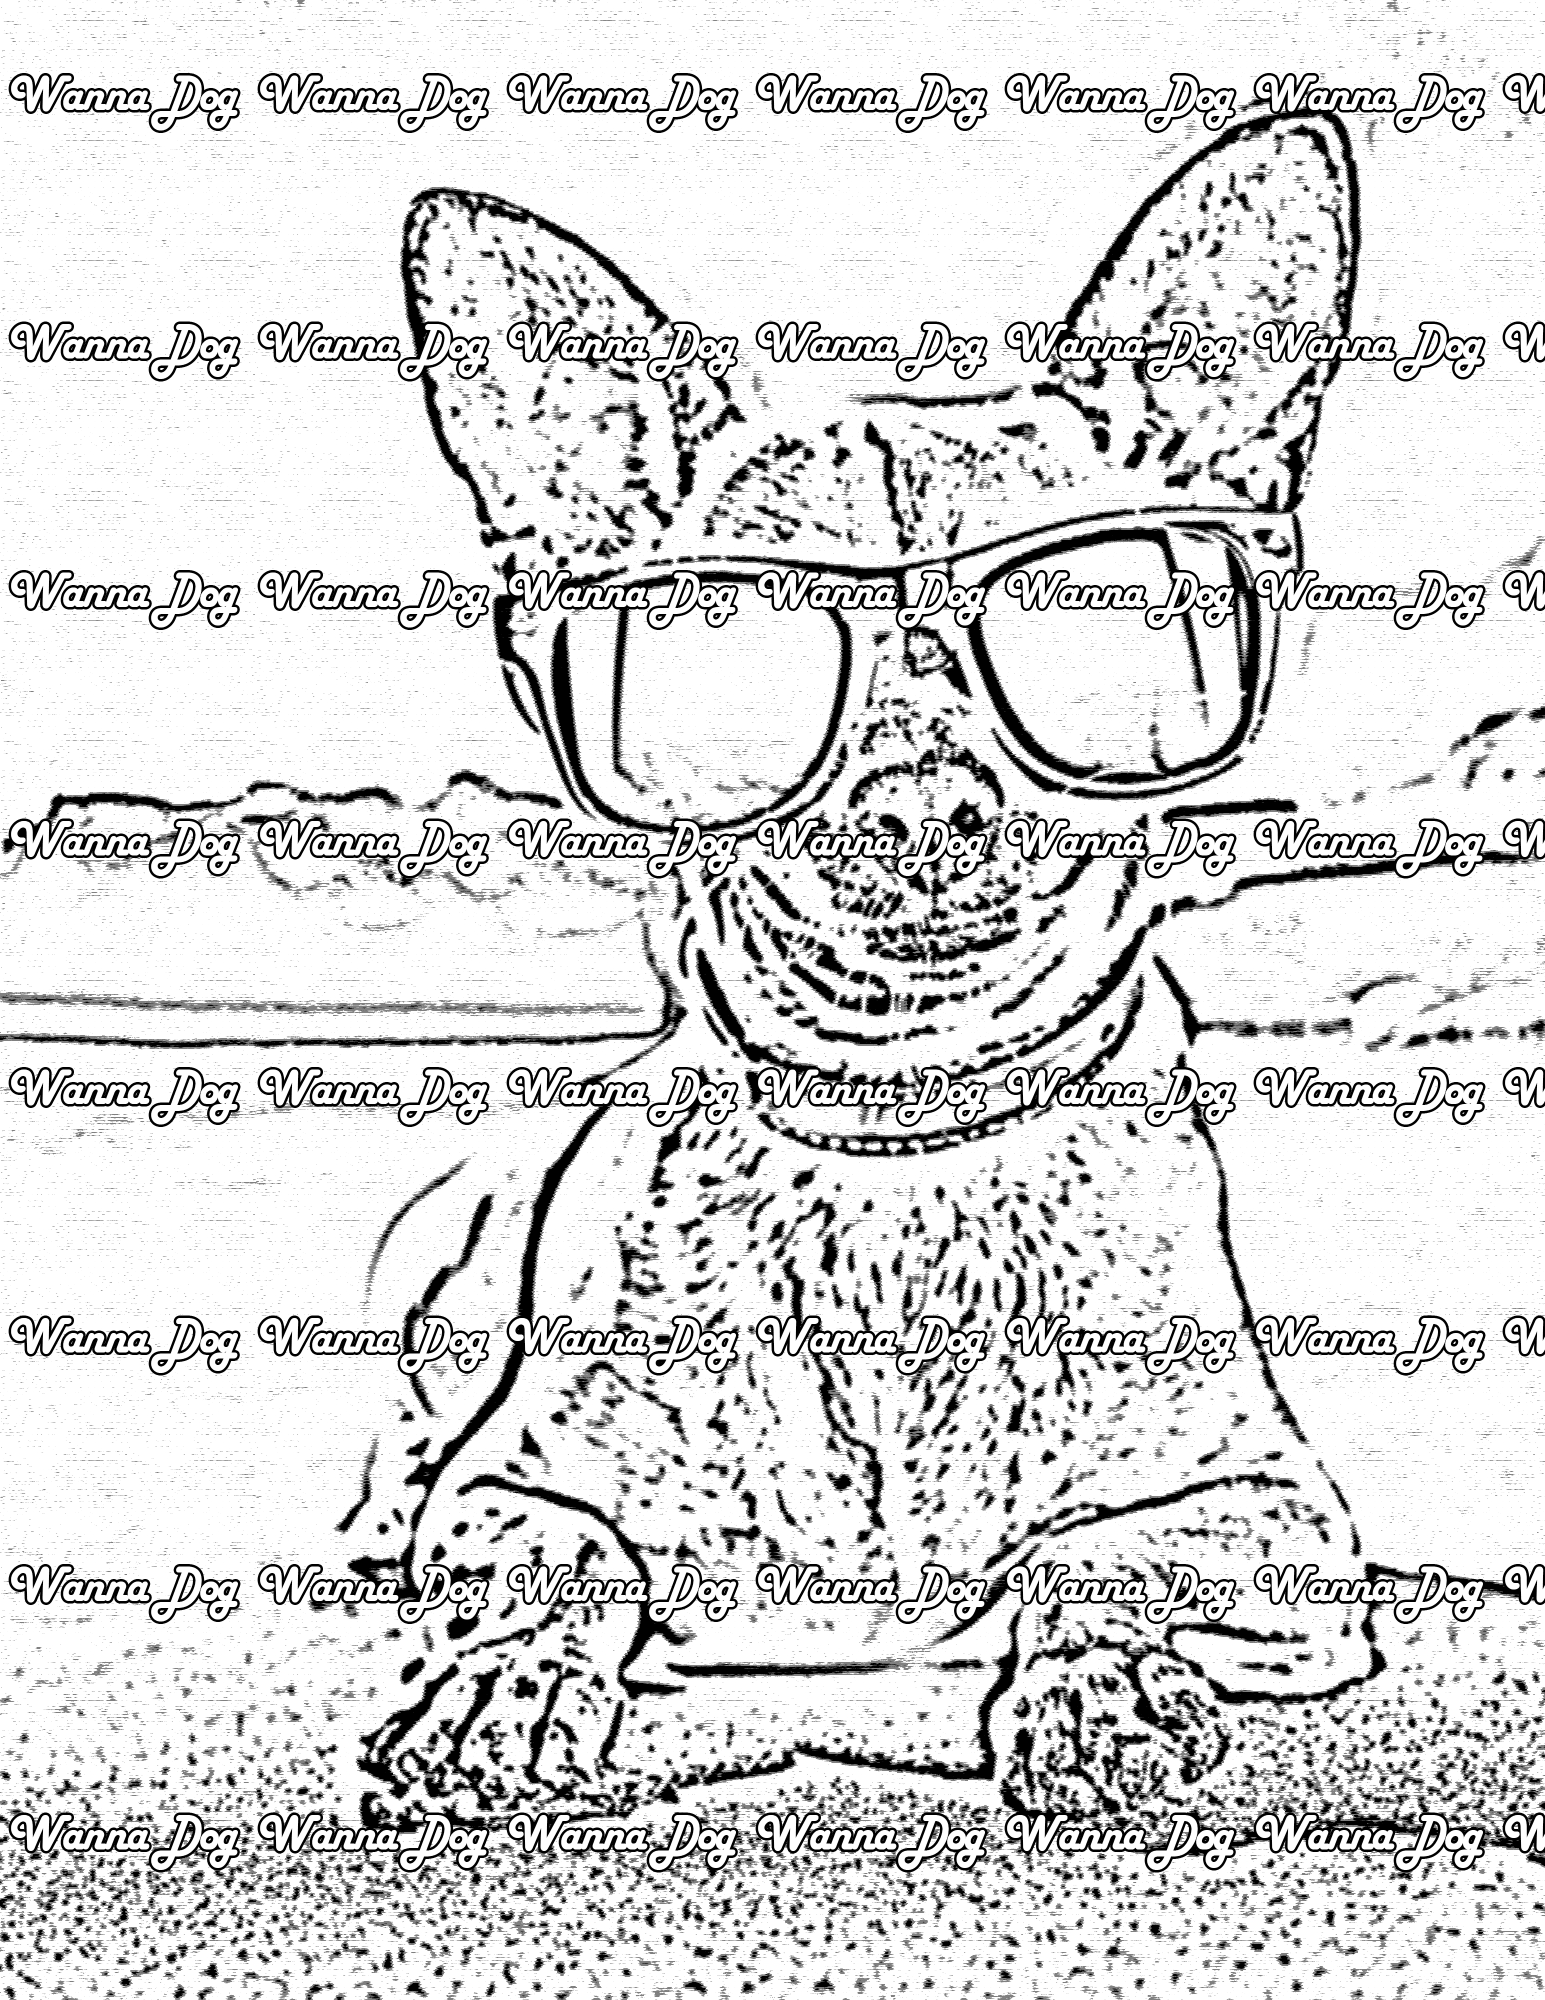 Chihuahua Coloring Page of a Chihuahua sitting on a beach in sunglasses